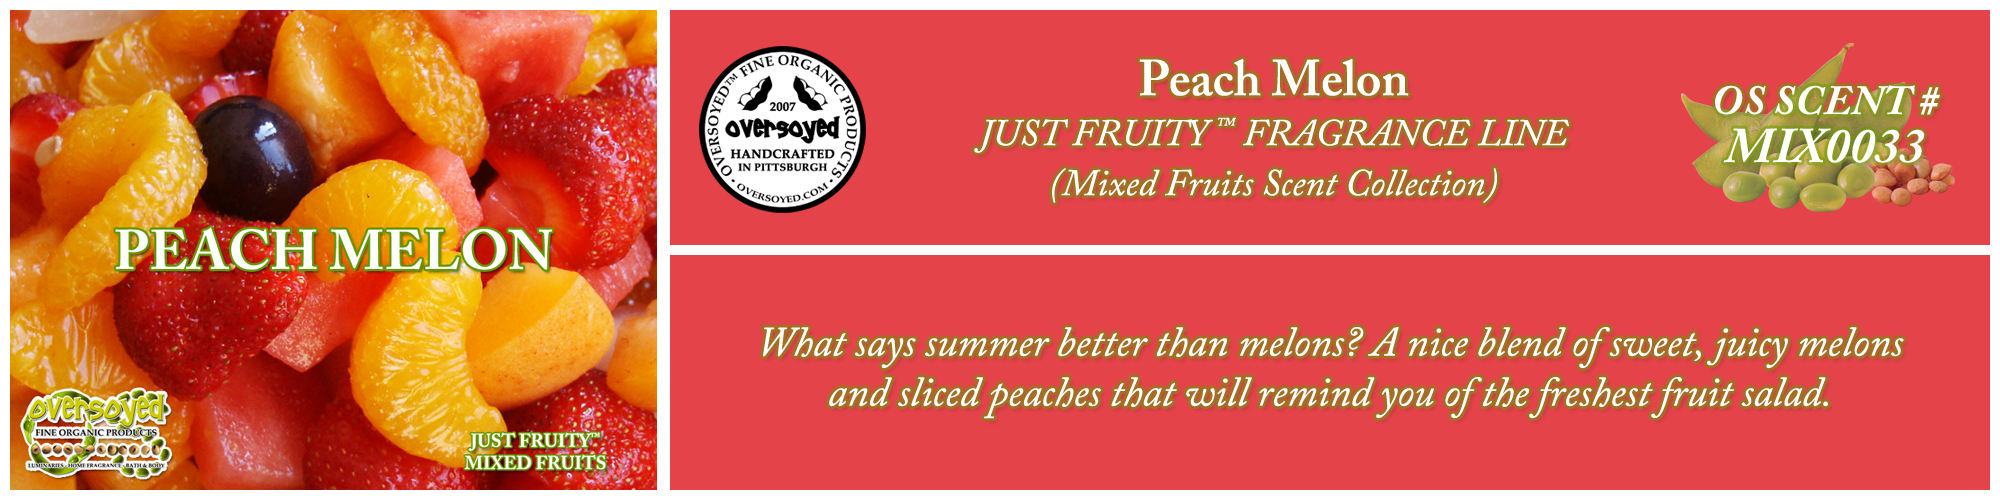 Peach Melon Handcrafted Products Collection